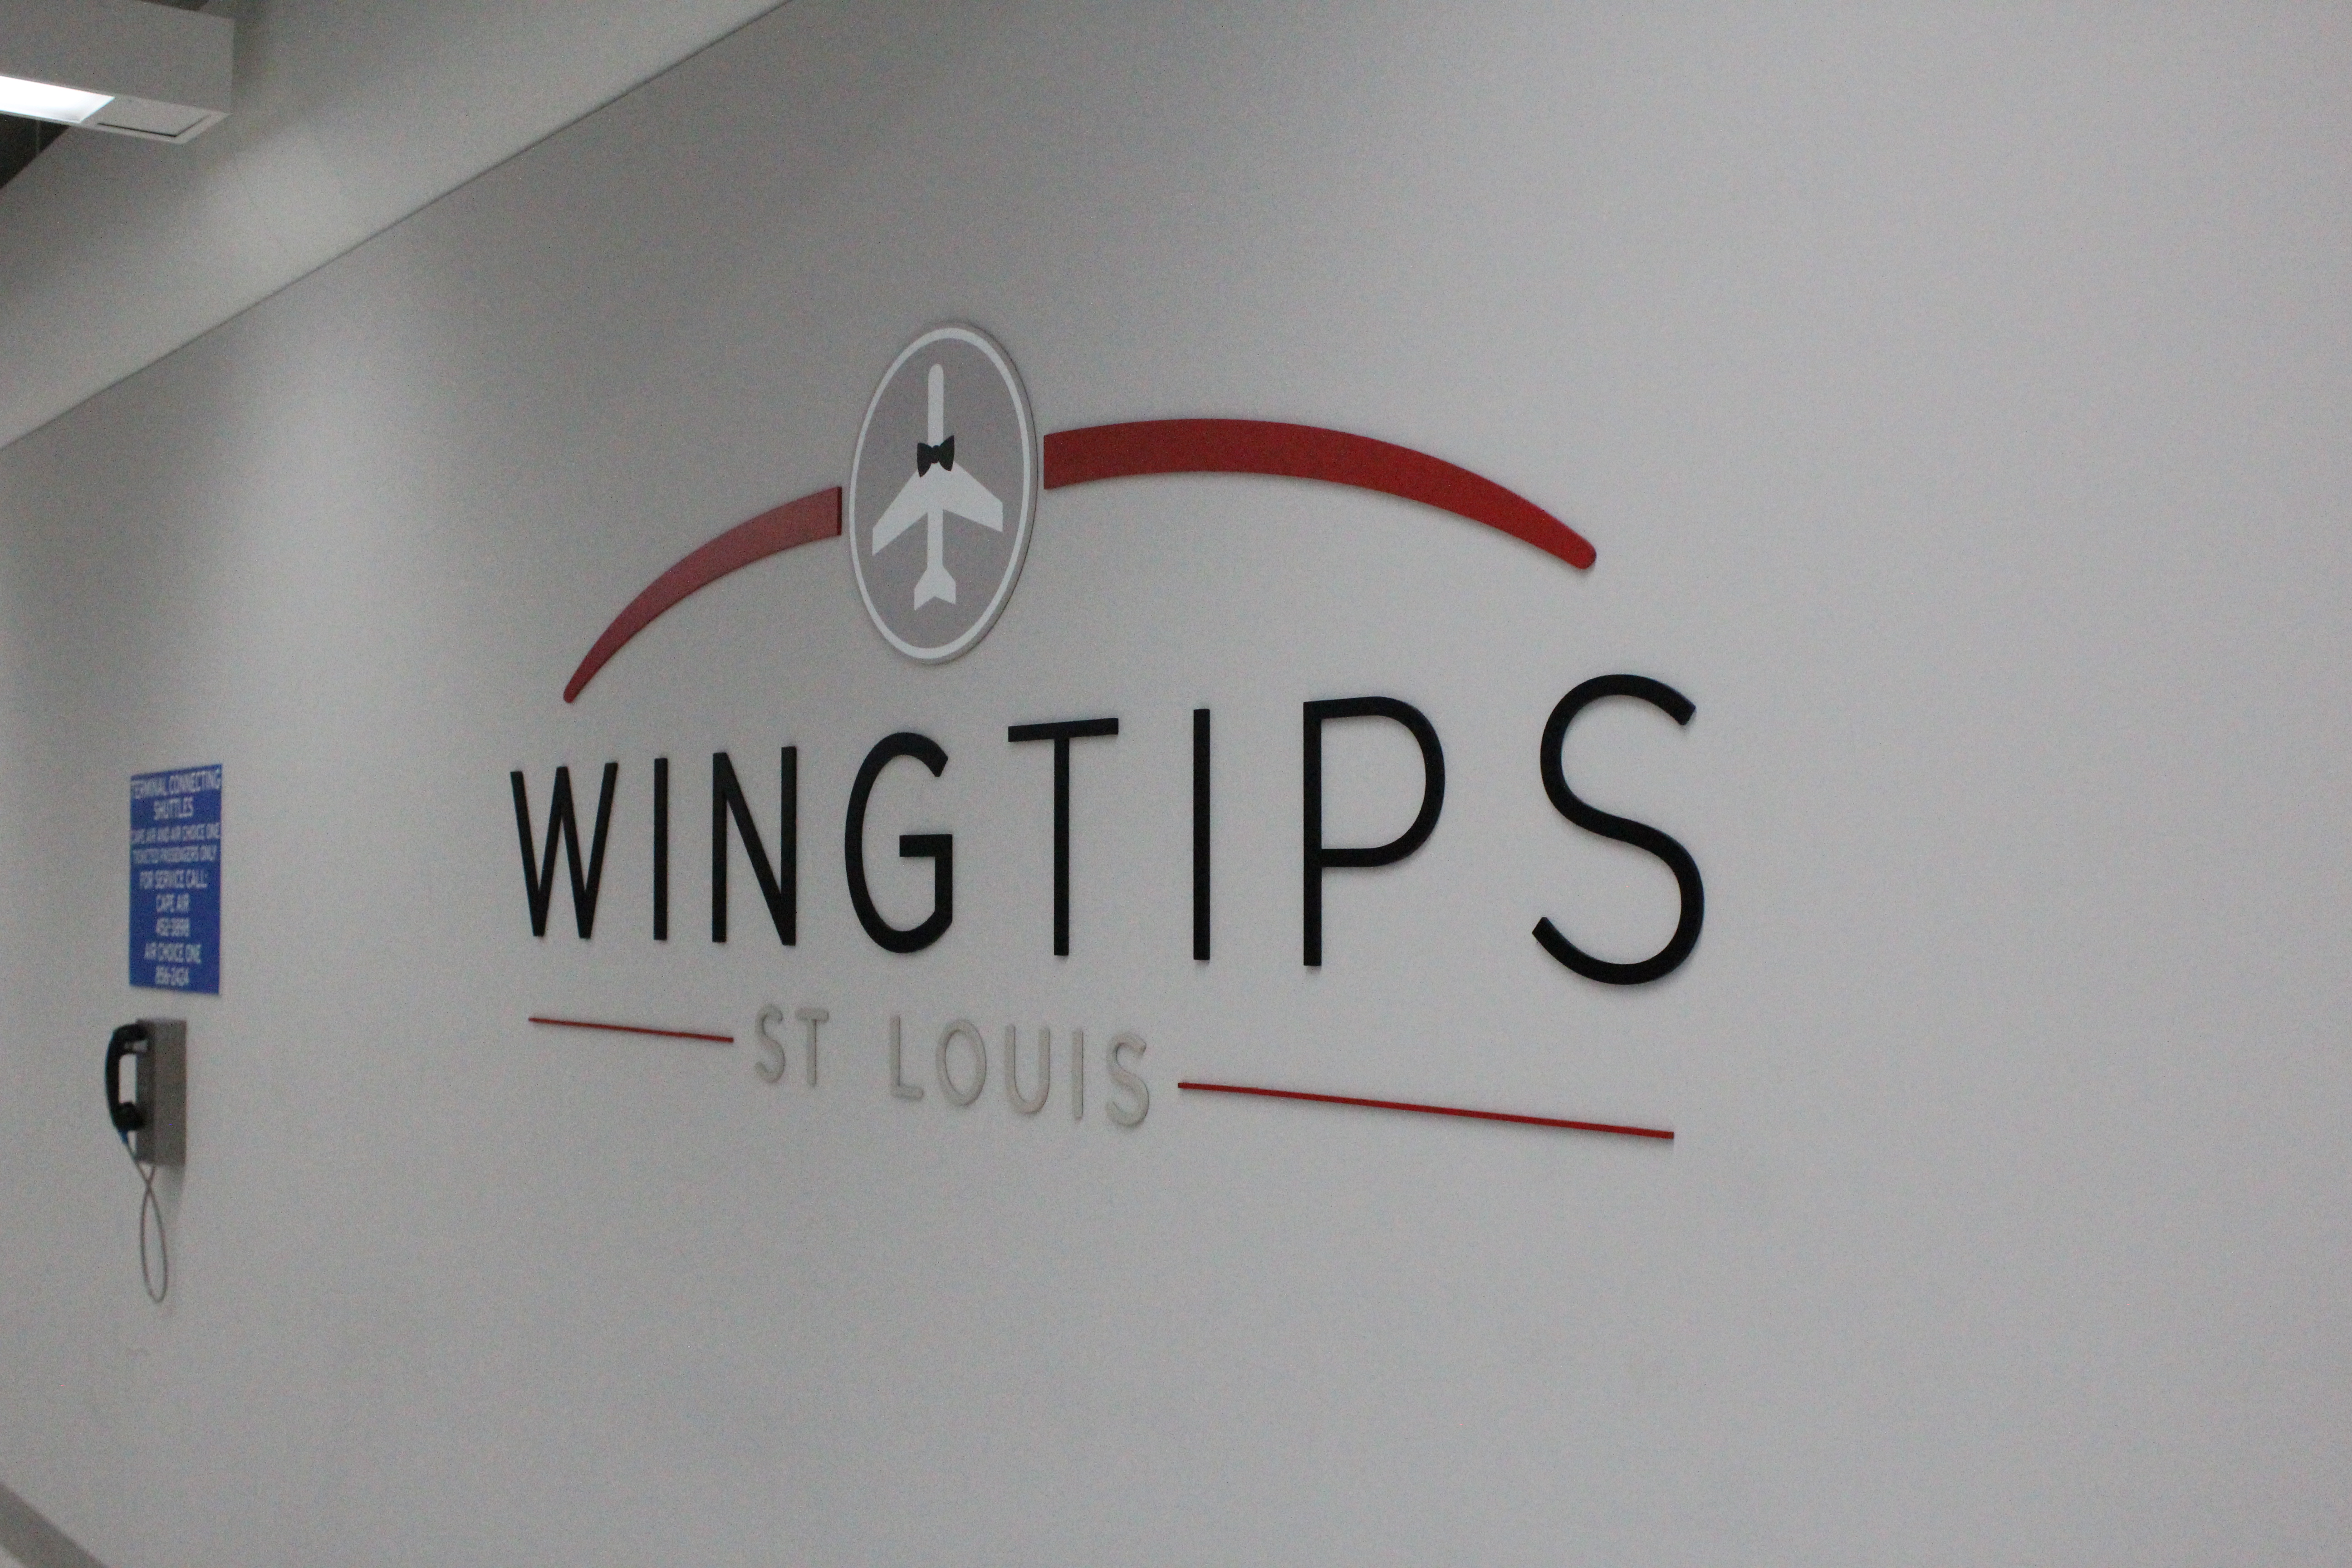 The Wingtips Lounge St. Louis Opens January 5th